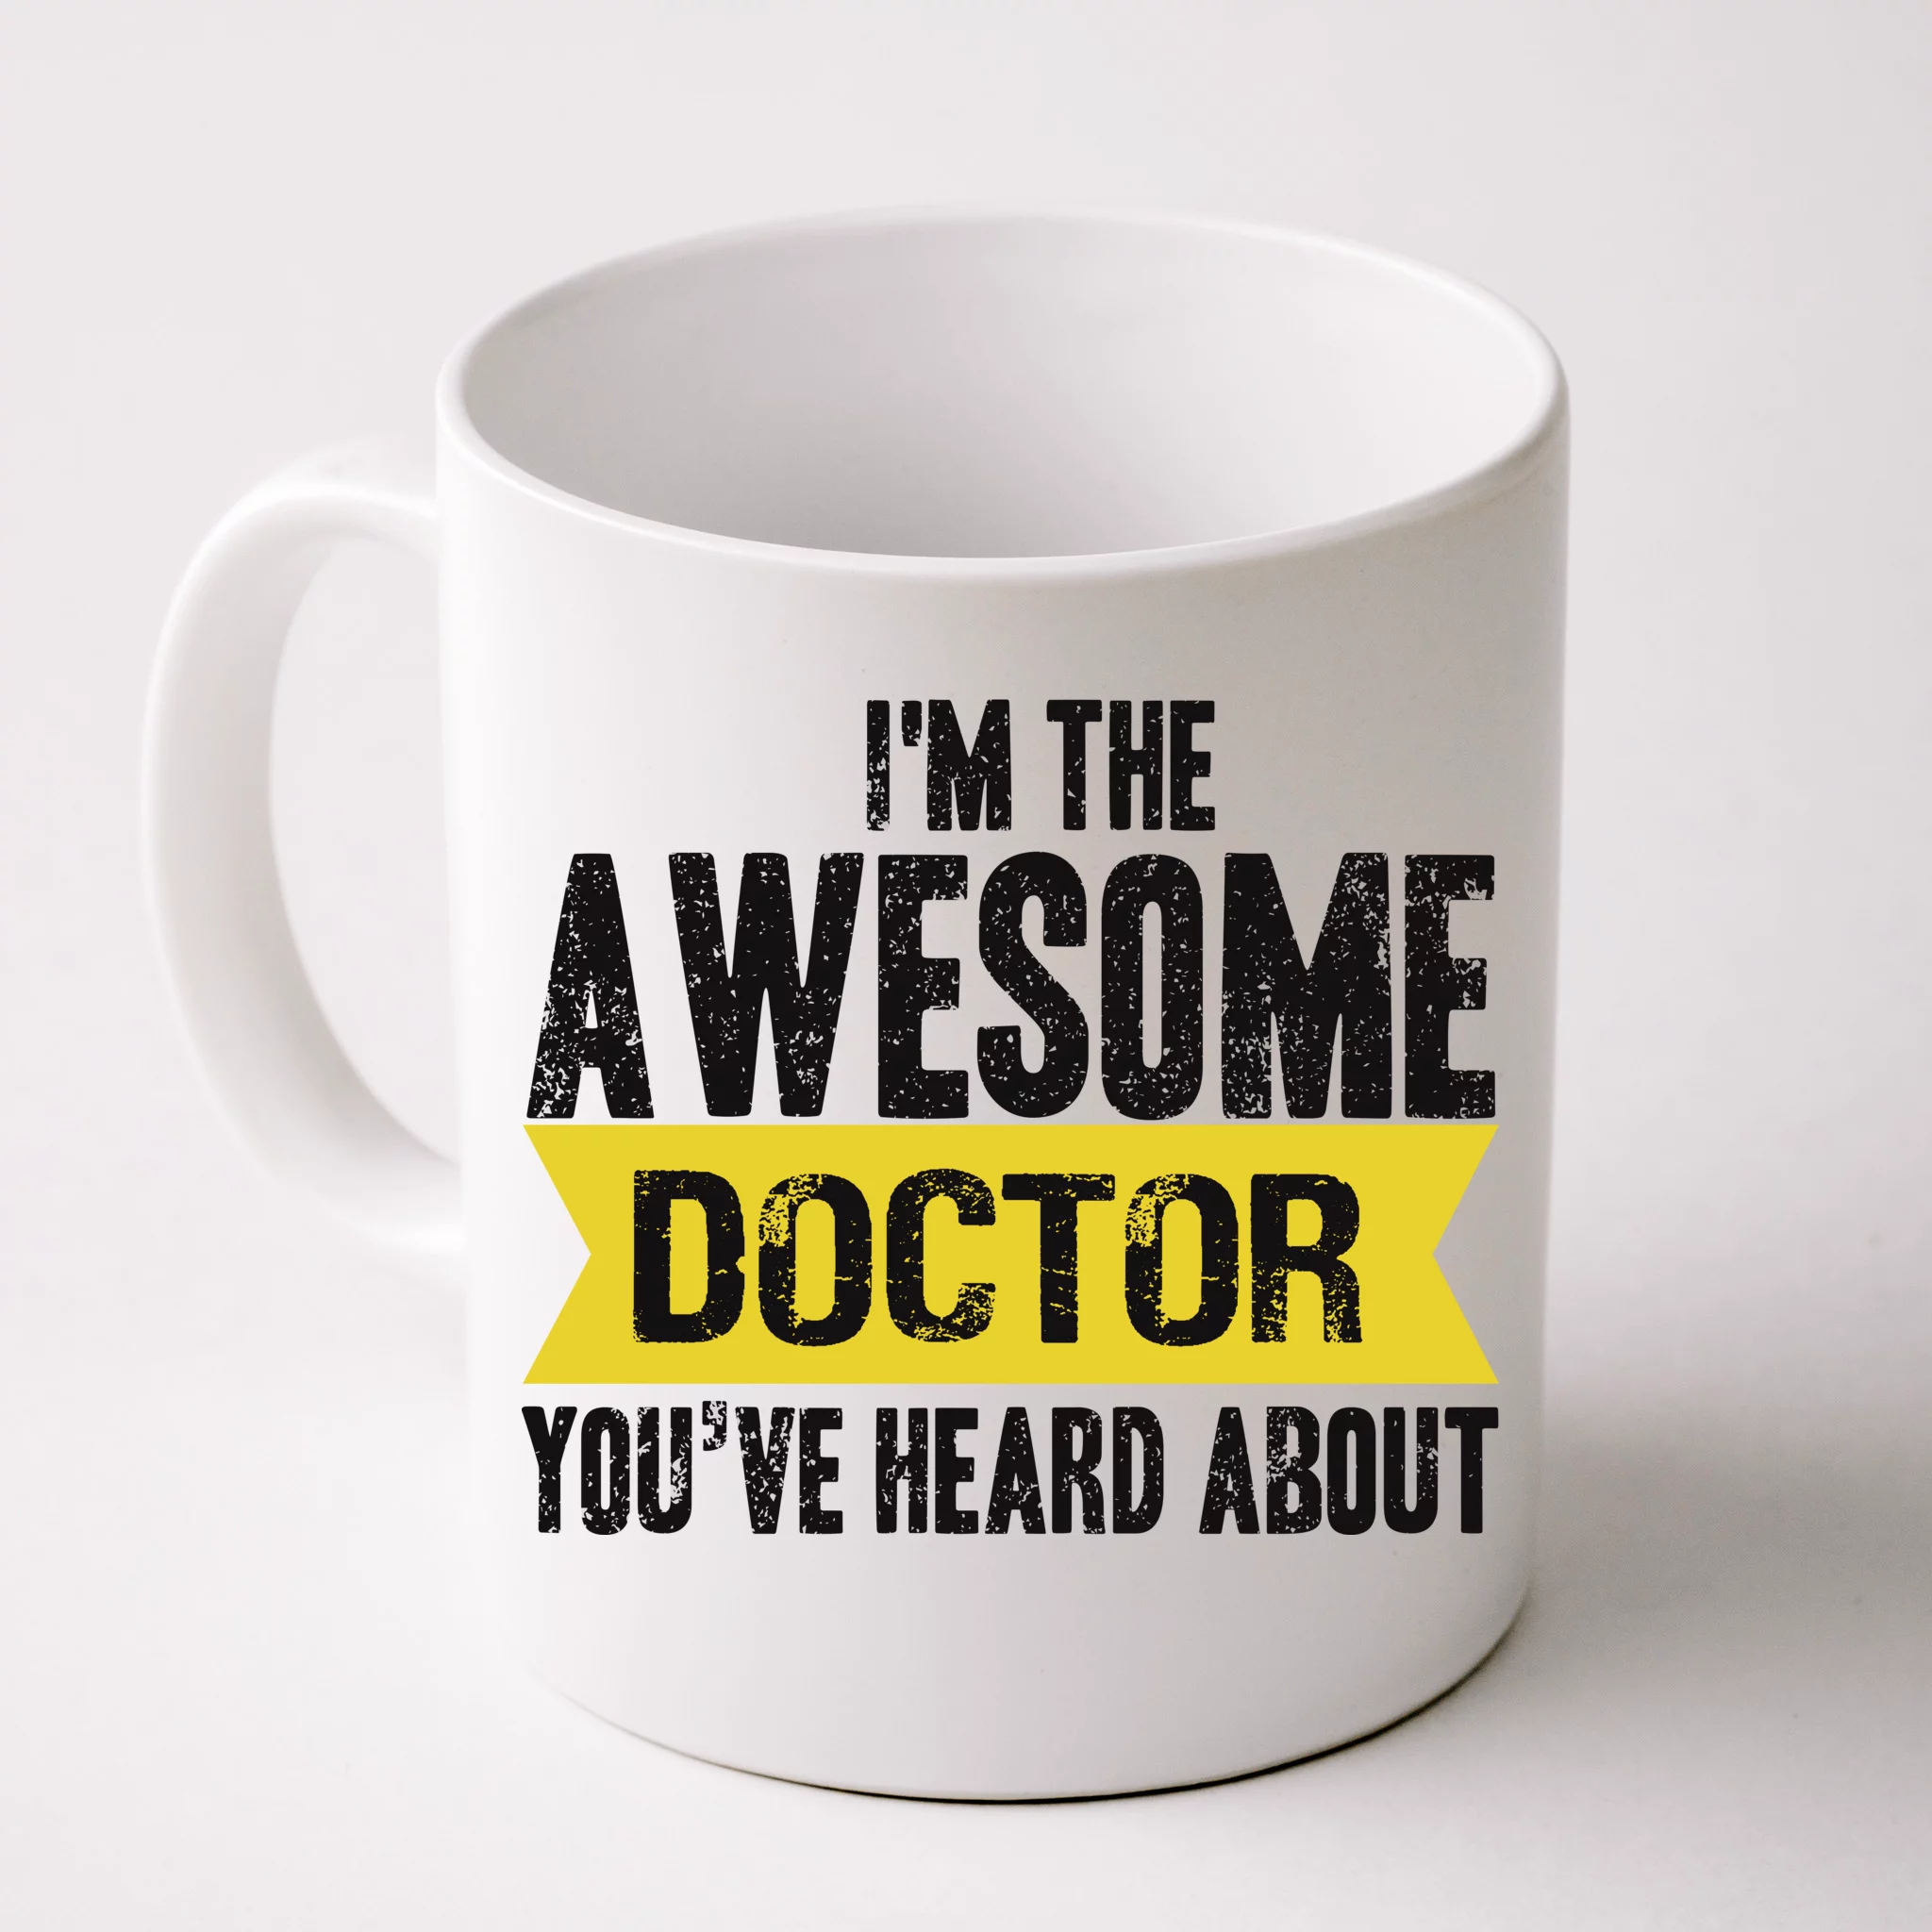 29 Gifts For Doctors to Make Their Daily Grind Better | Medical gifts, Best  gifts for doctors, Doctor gifts